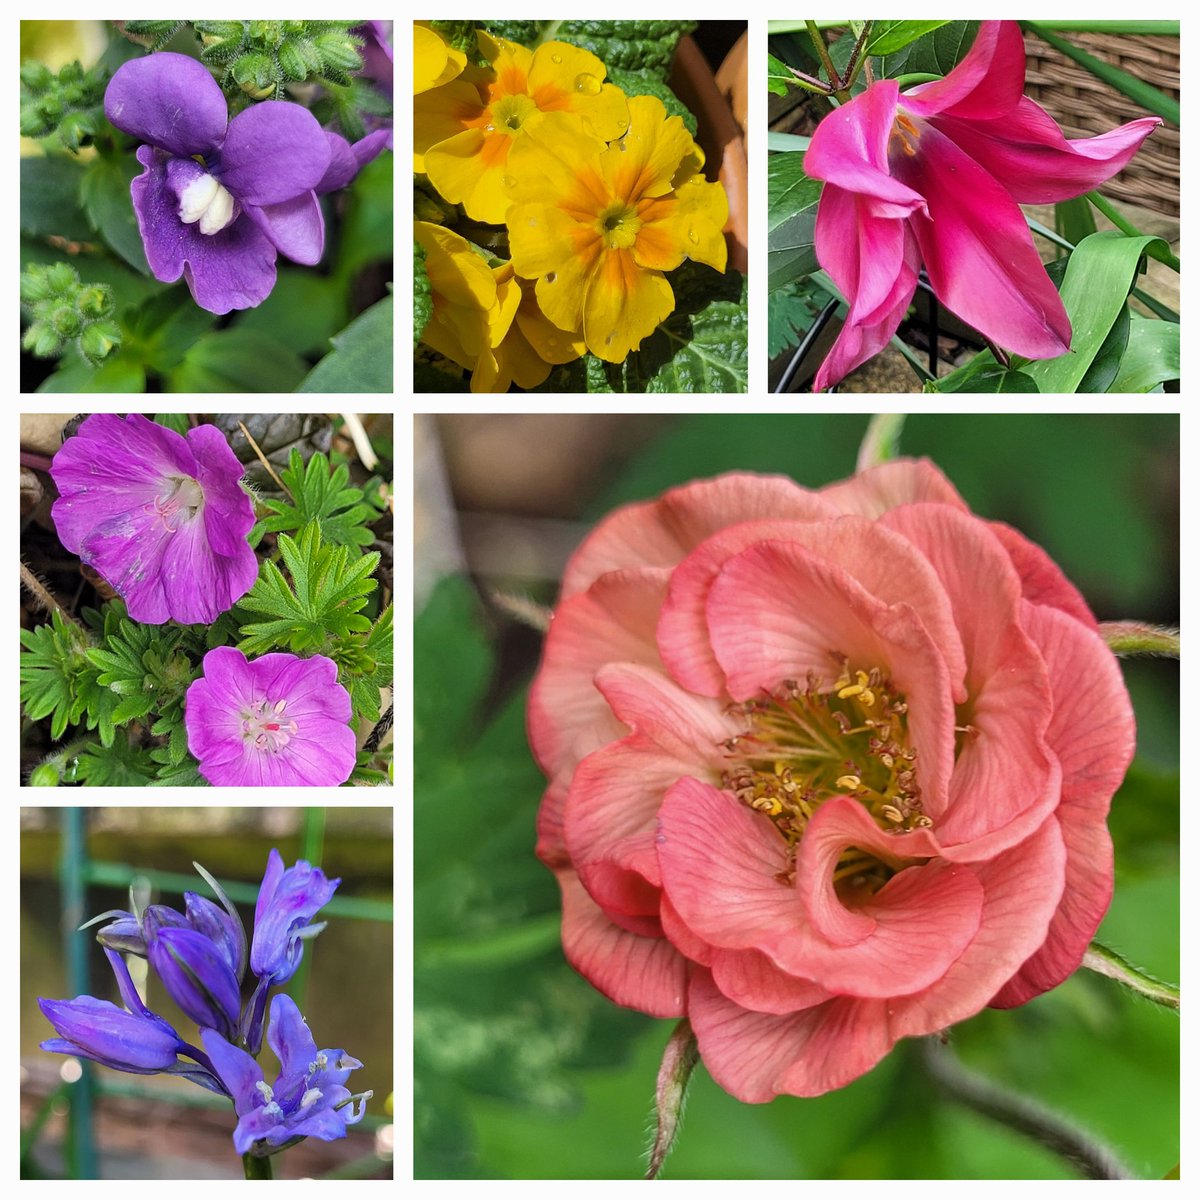 This weeks #SixOnSaturday Tender plants and seedlings in growhouses survived very low overnight temperatures. Luckily no frost. Sunny start to the weekend, hoping to spend time in the garden. Have a lovely day everyone🌸 🌿 #flowers #GardeningX #garden #WeekendVibes #spring